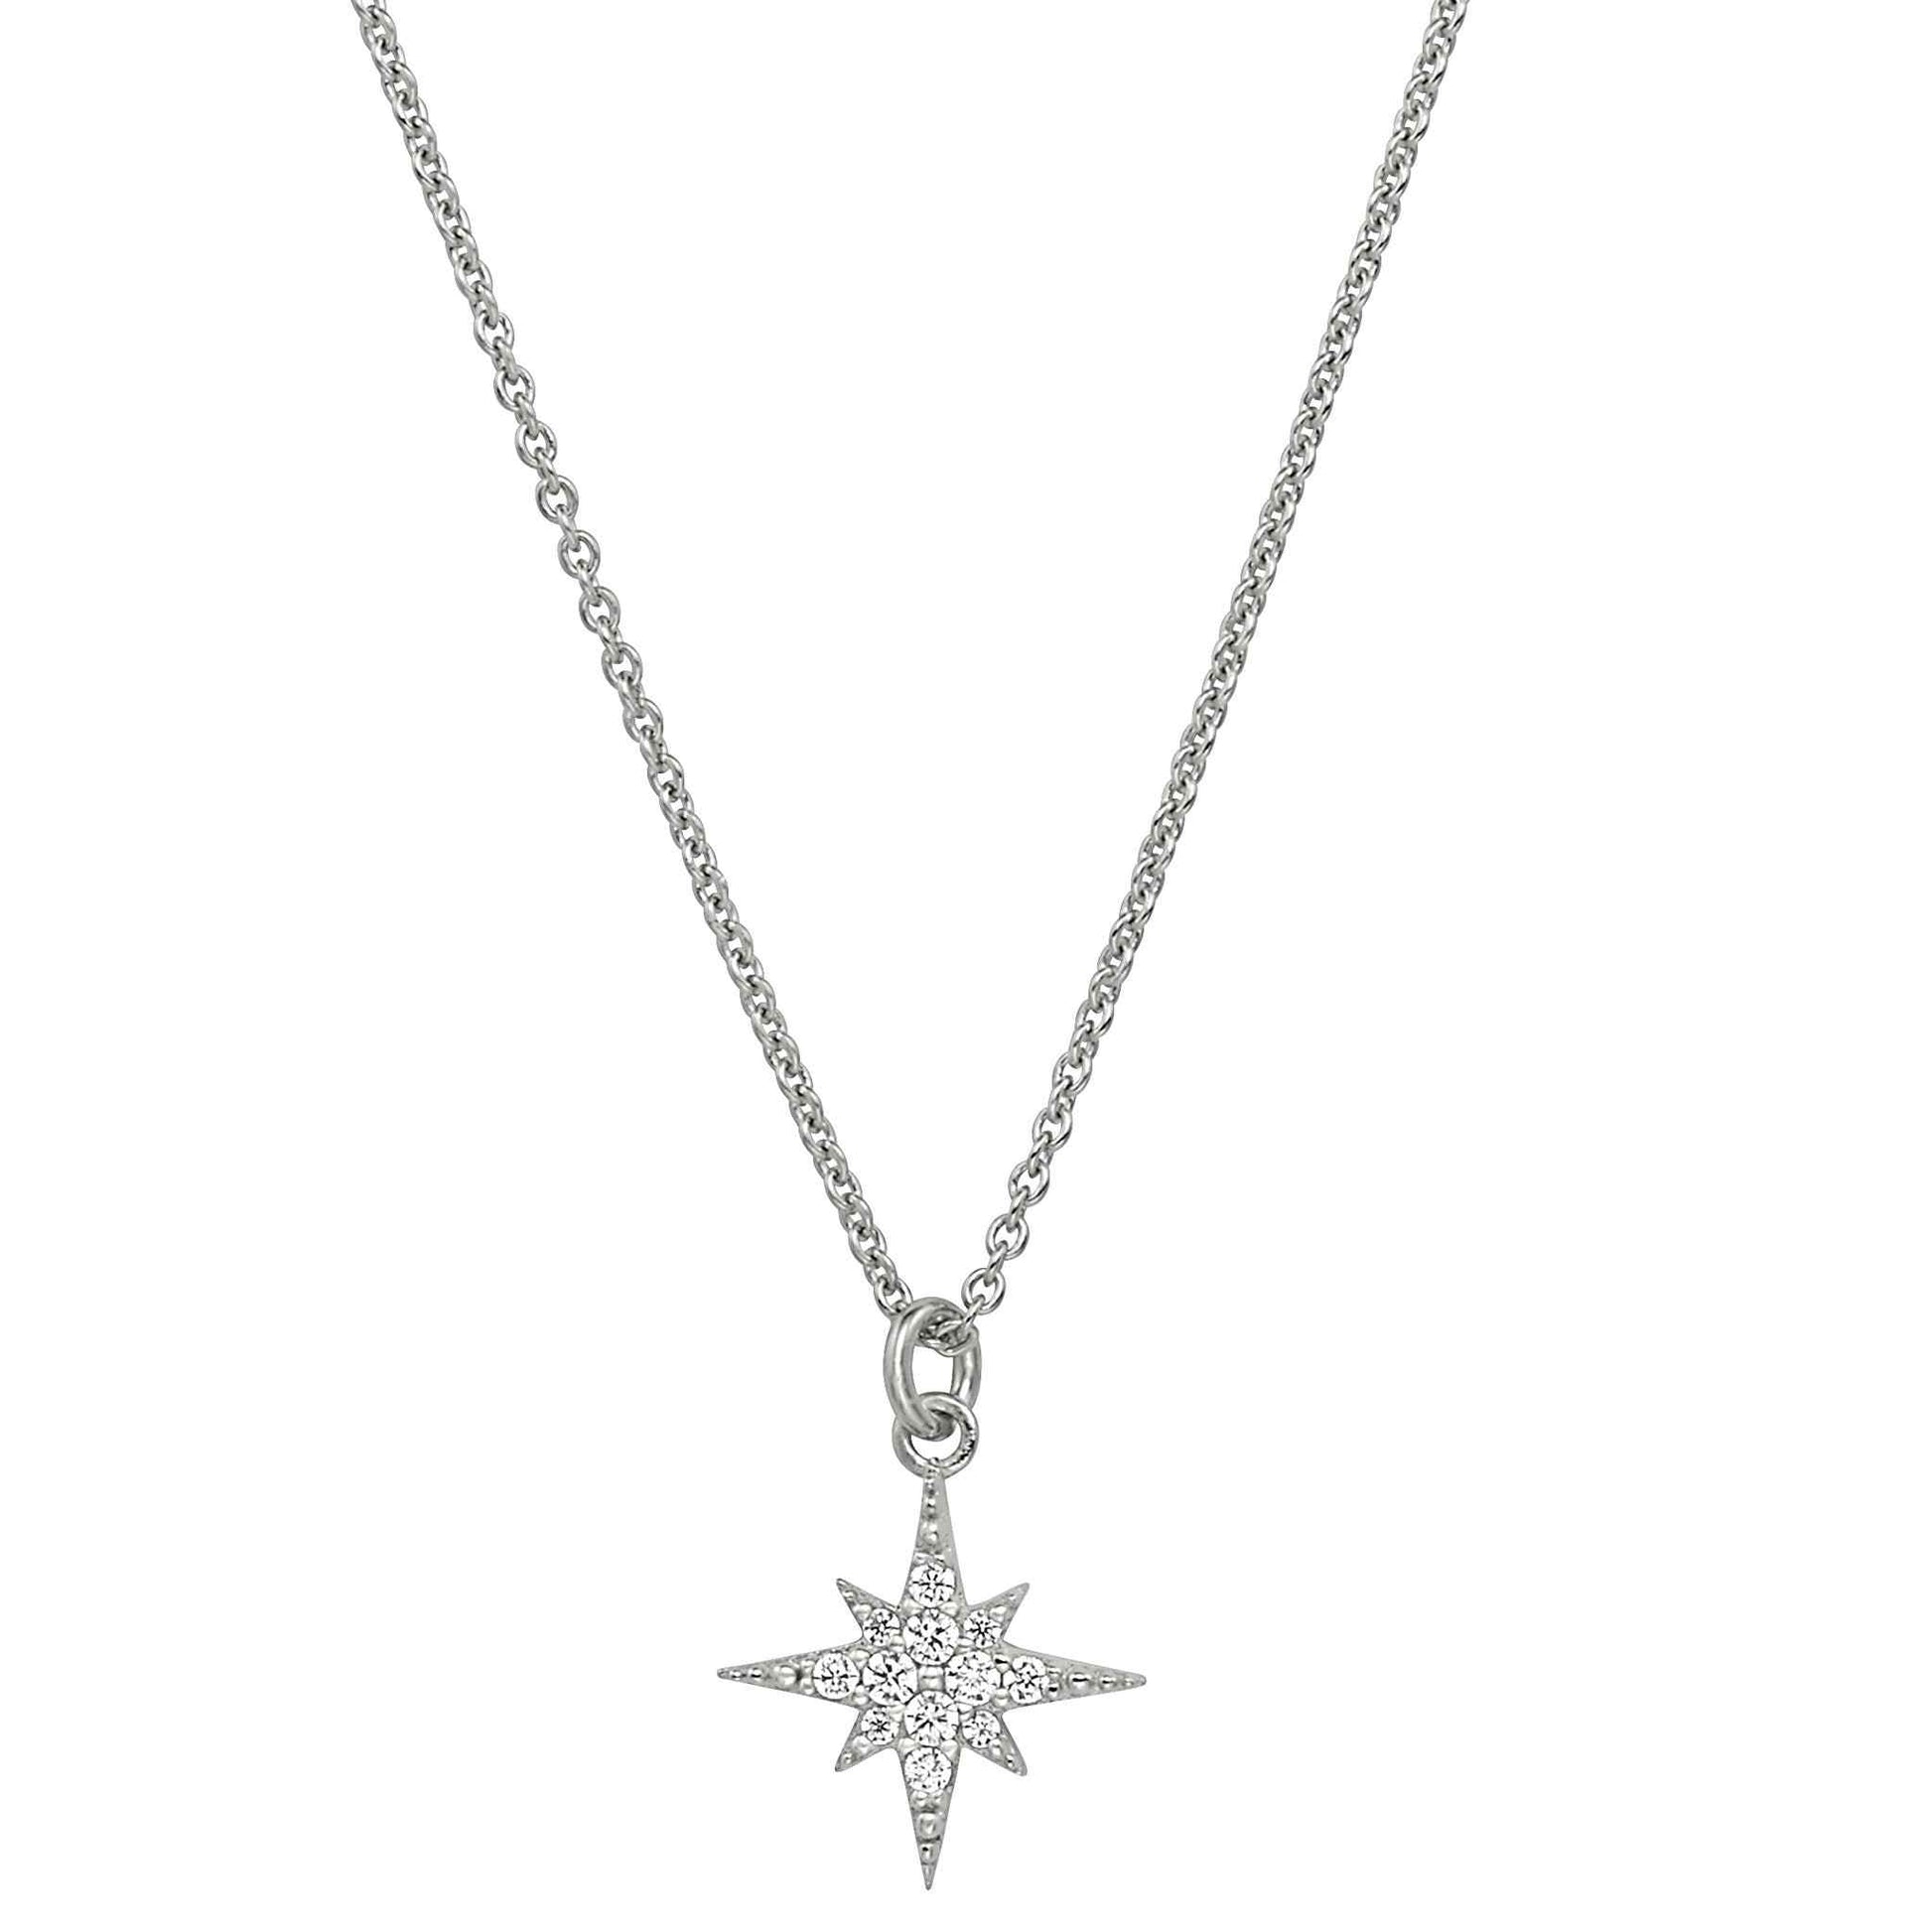 A sterling silver starburst necklace with simulated diamonds displayed on a neutral white background.